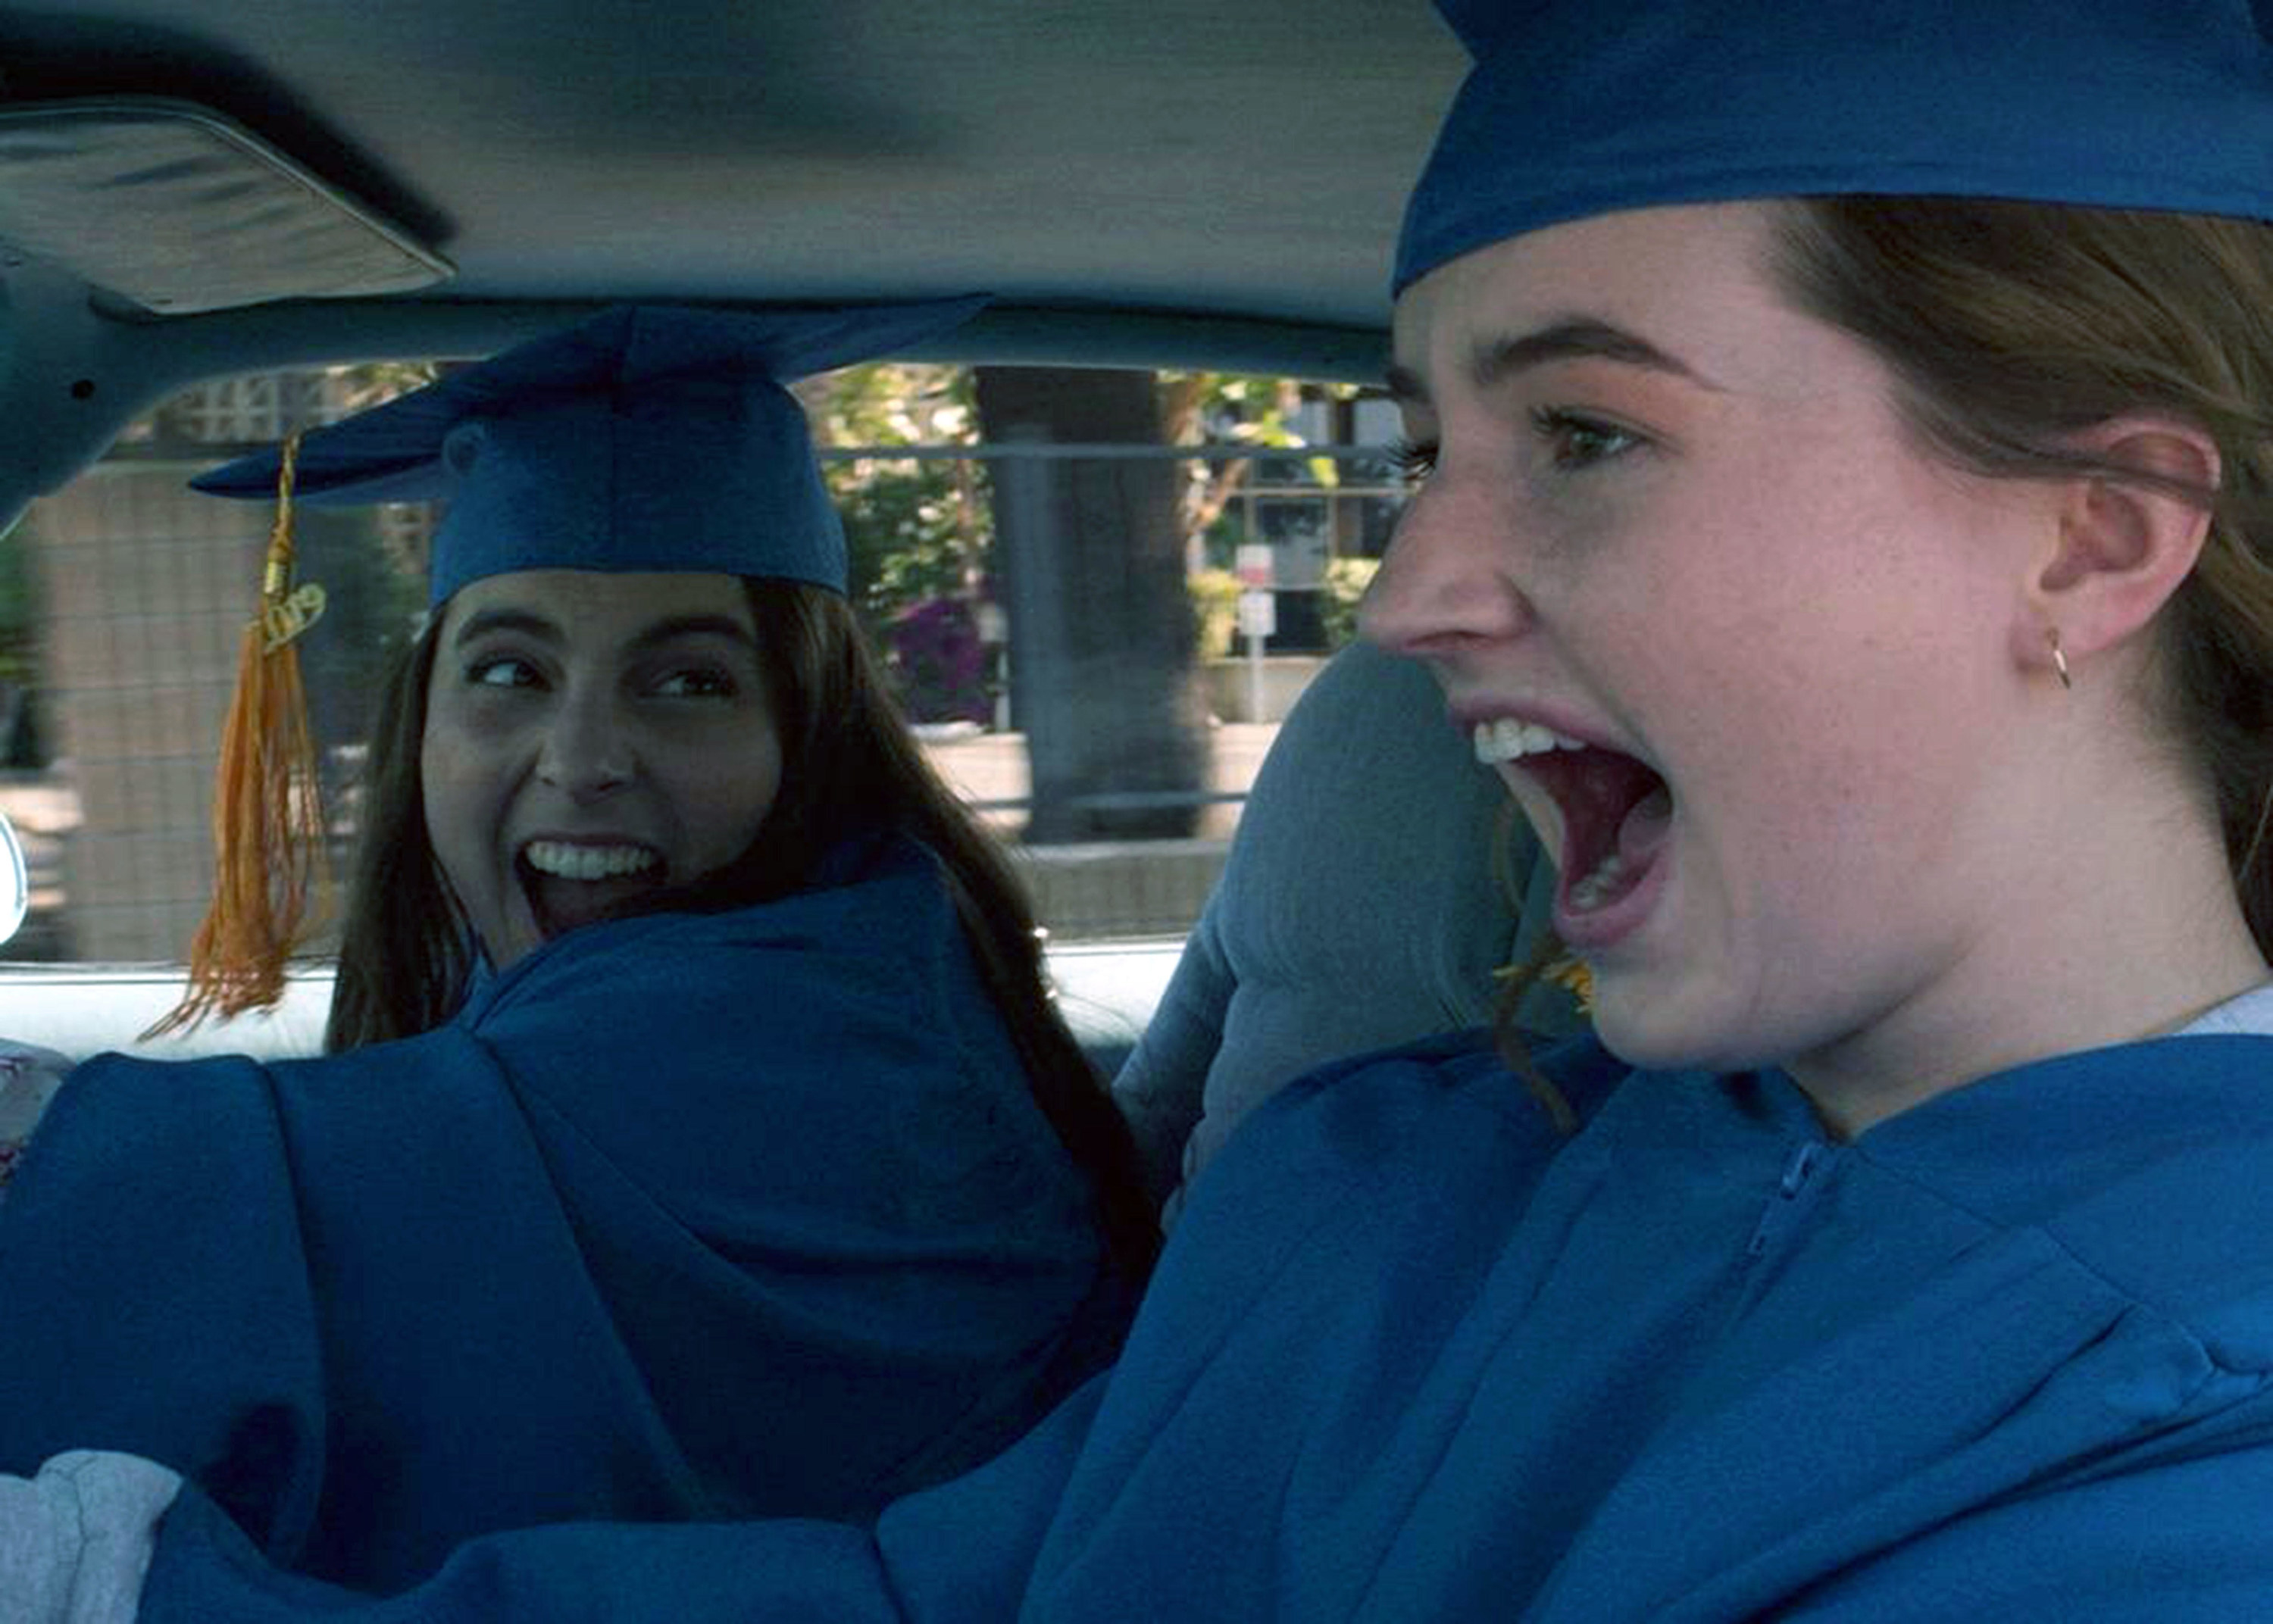 Two young women in graduation gowns scream while speeding to their graduation ceremony